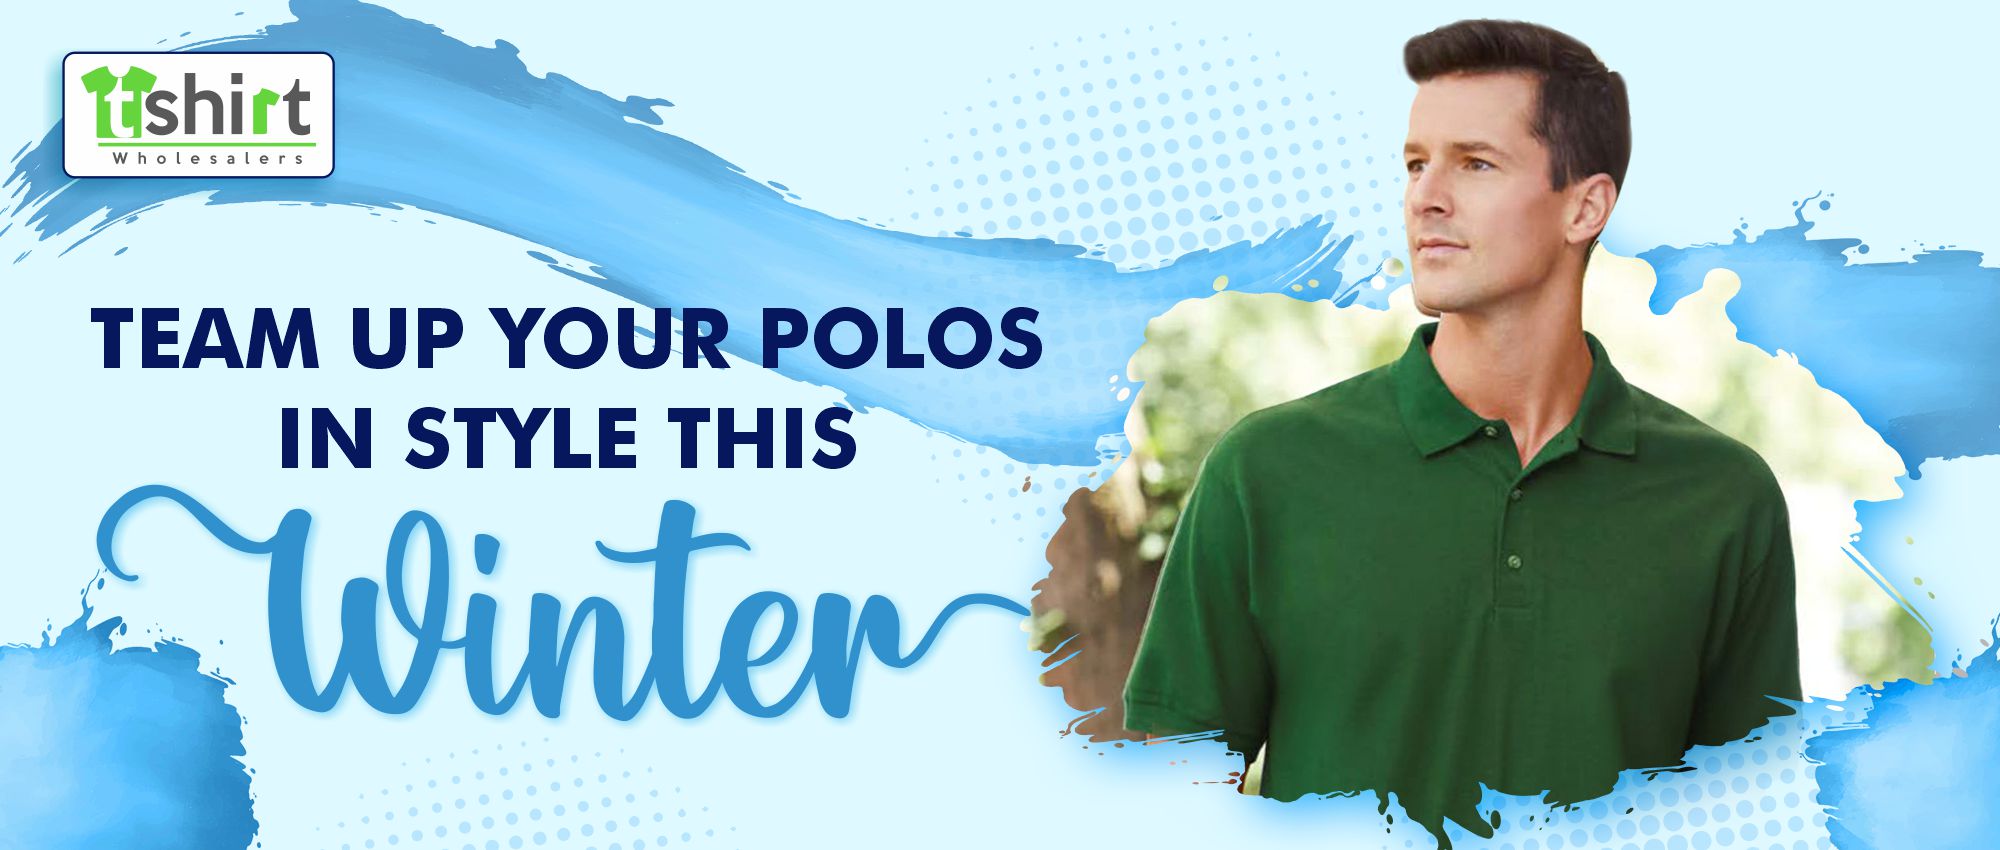 TEAM UP YOUR POLOS IN STYLE THIS WINTER